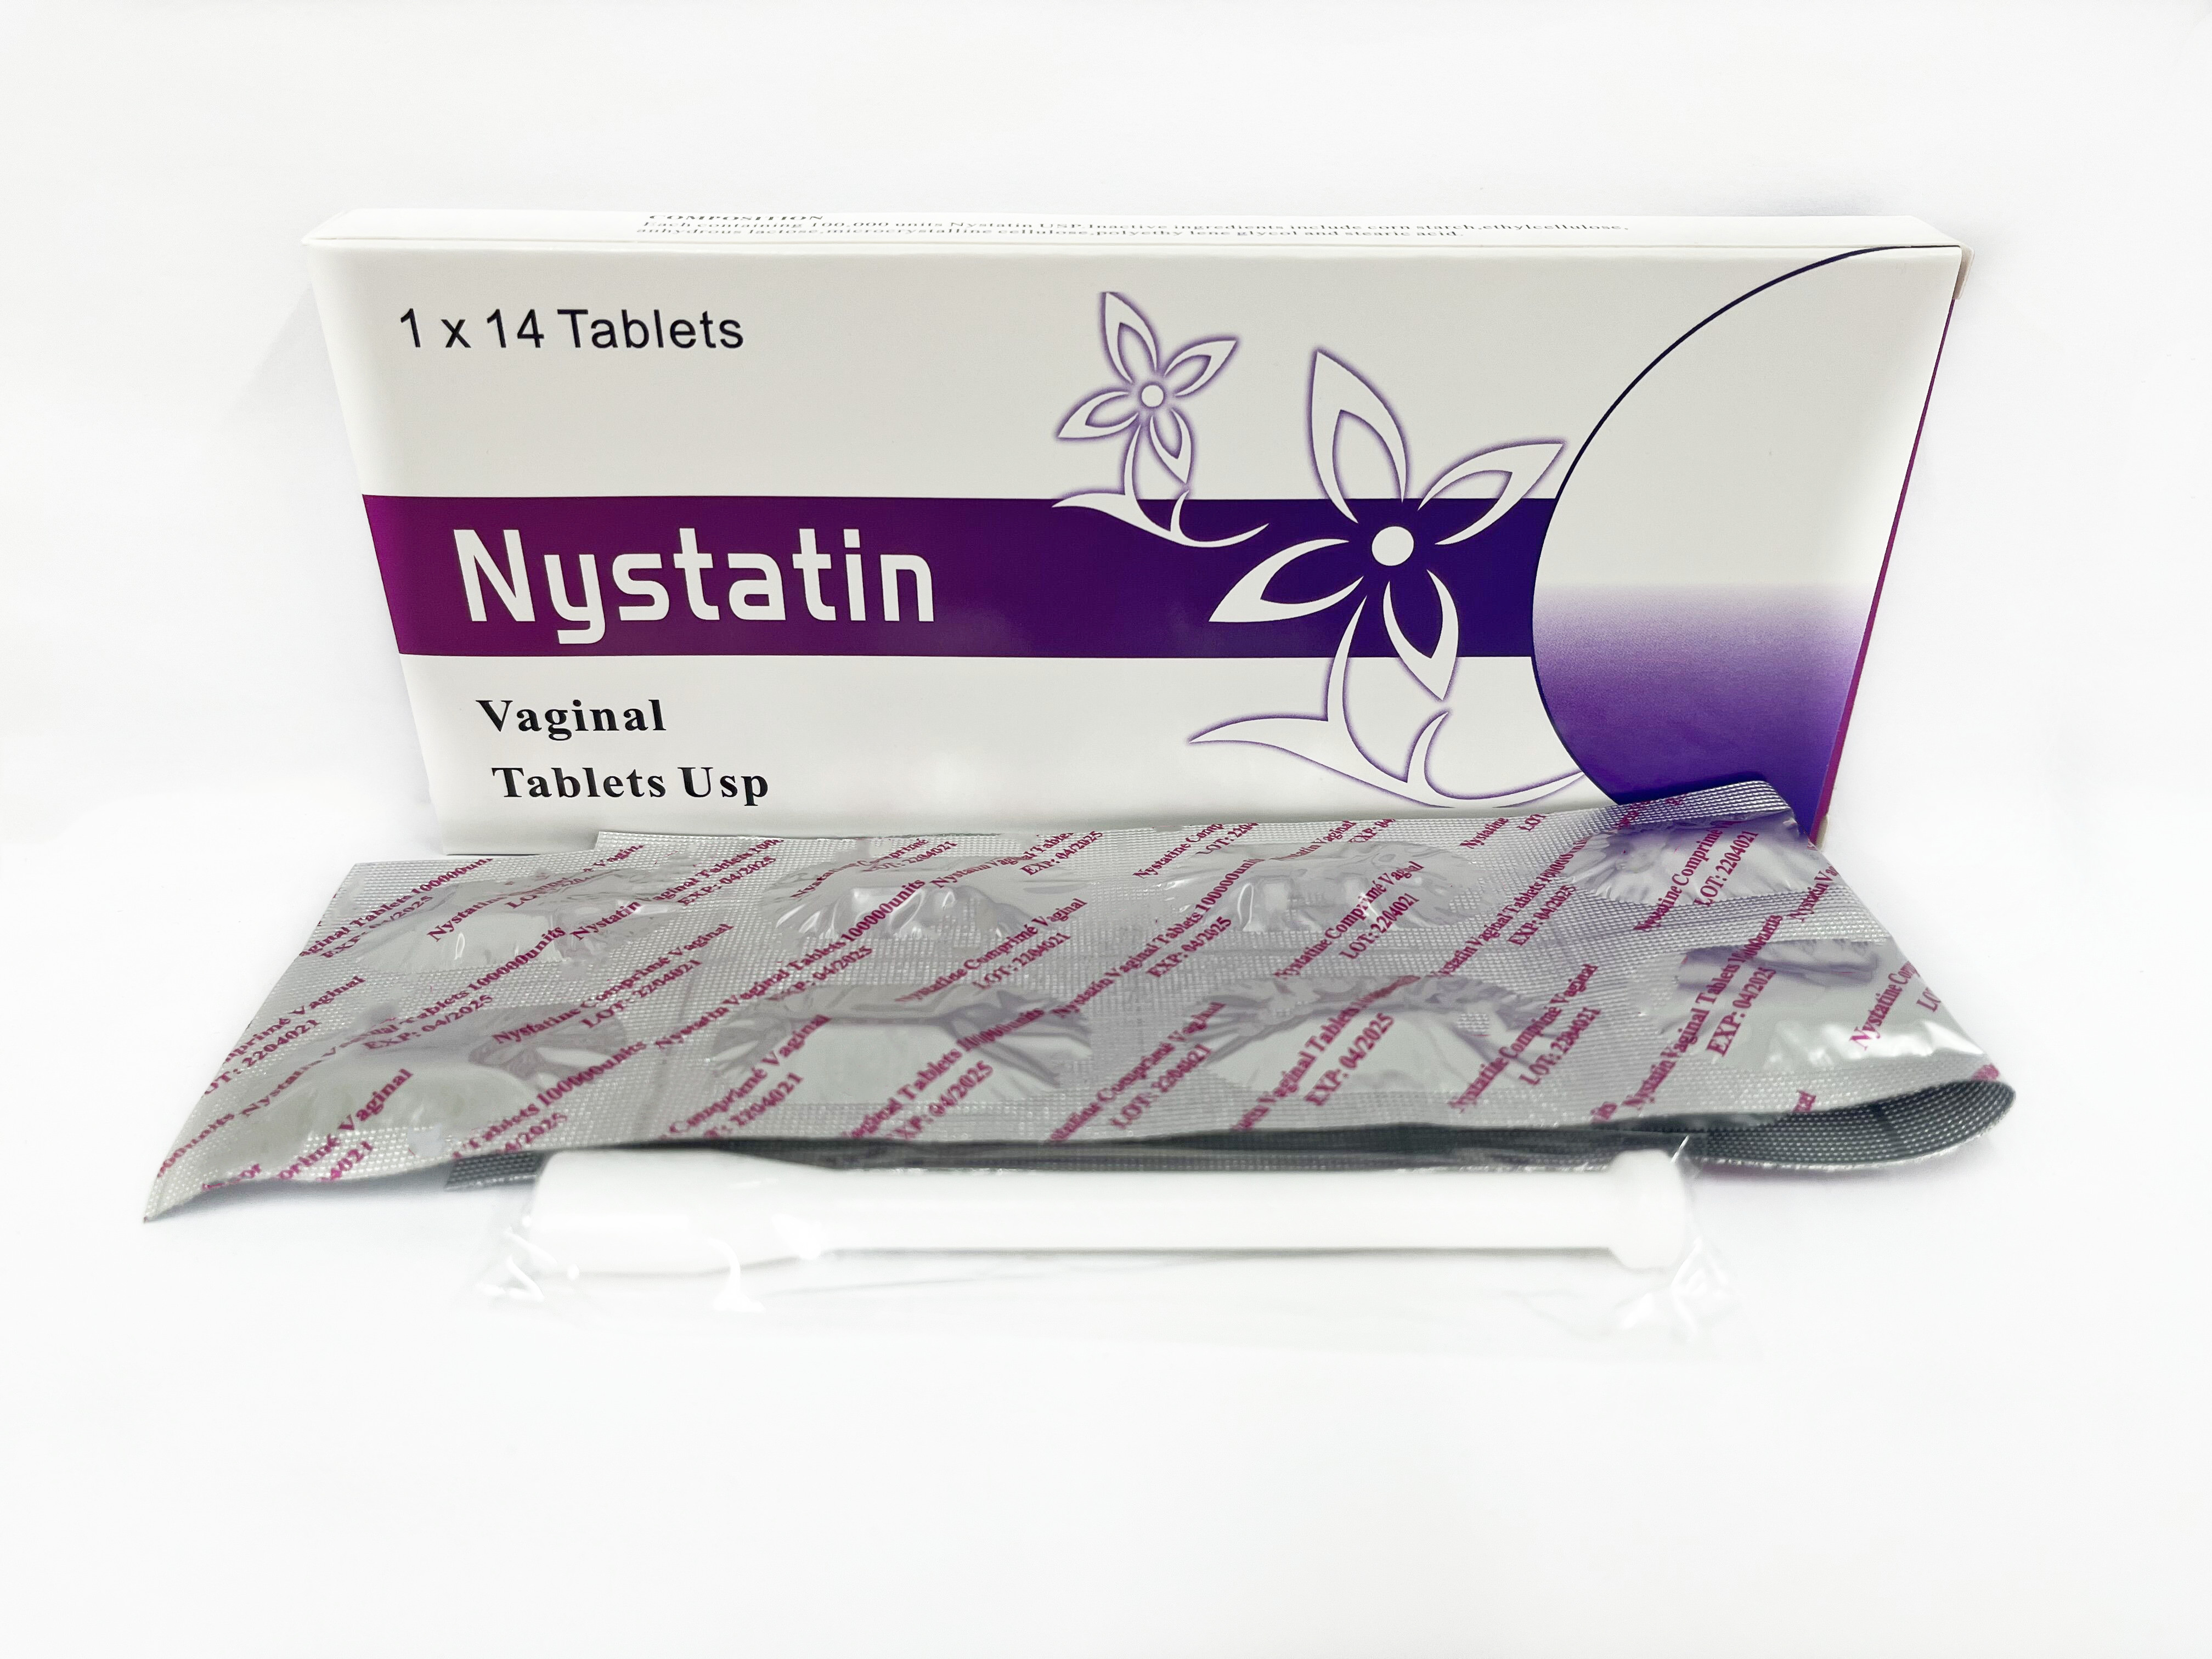 Nystatine Vaginal Tablets(10,000 units) Featured Image